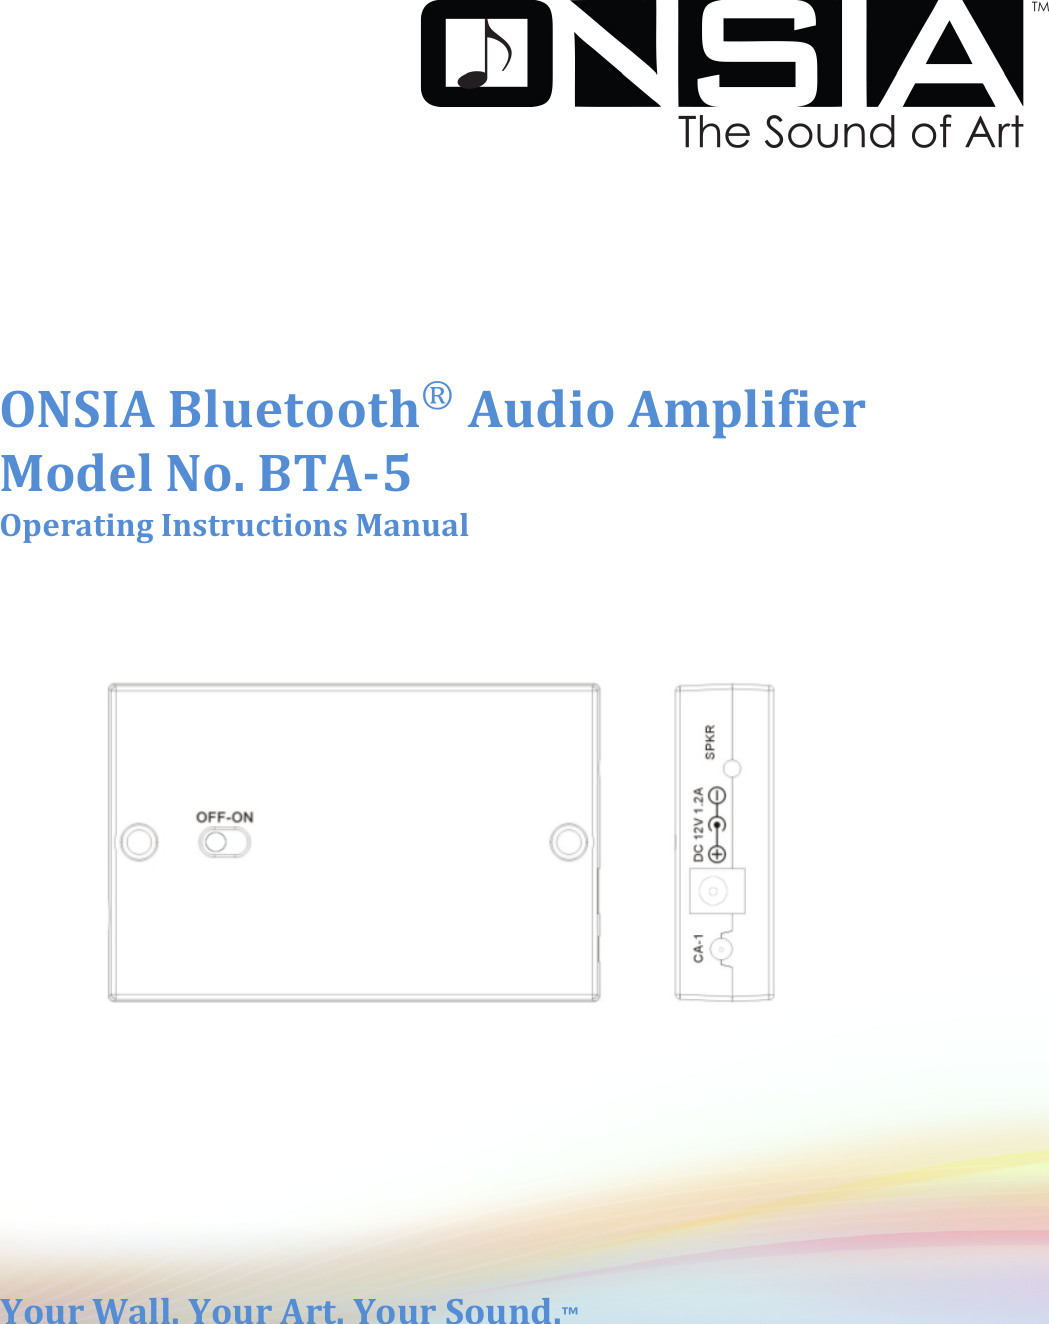 !!!! !                          !        Operating*Instructions*Manual**ONSIA*𝐁𝐥𝐮𝐞𝐭𝐨𝐨𝐭𝐡®*Audio*Amplifier**Model*No.*BTA;5*Your*Wall.*Your*Art.*Your*Sound.™*